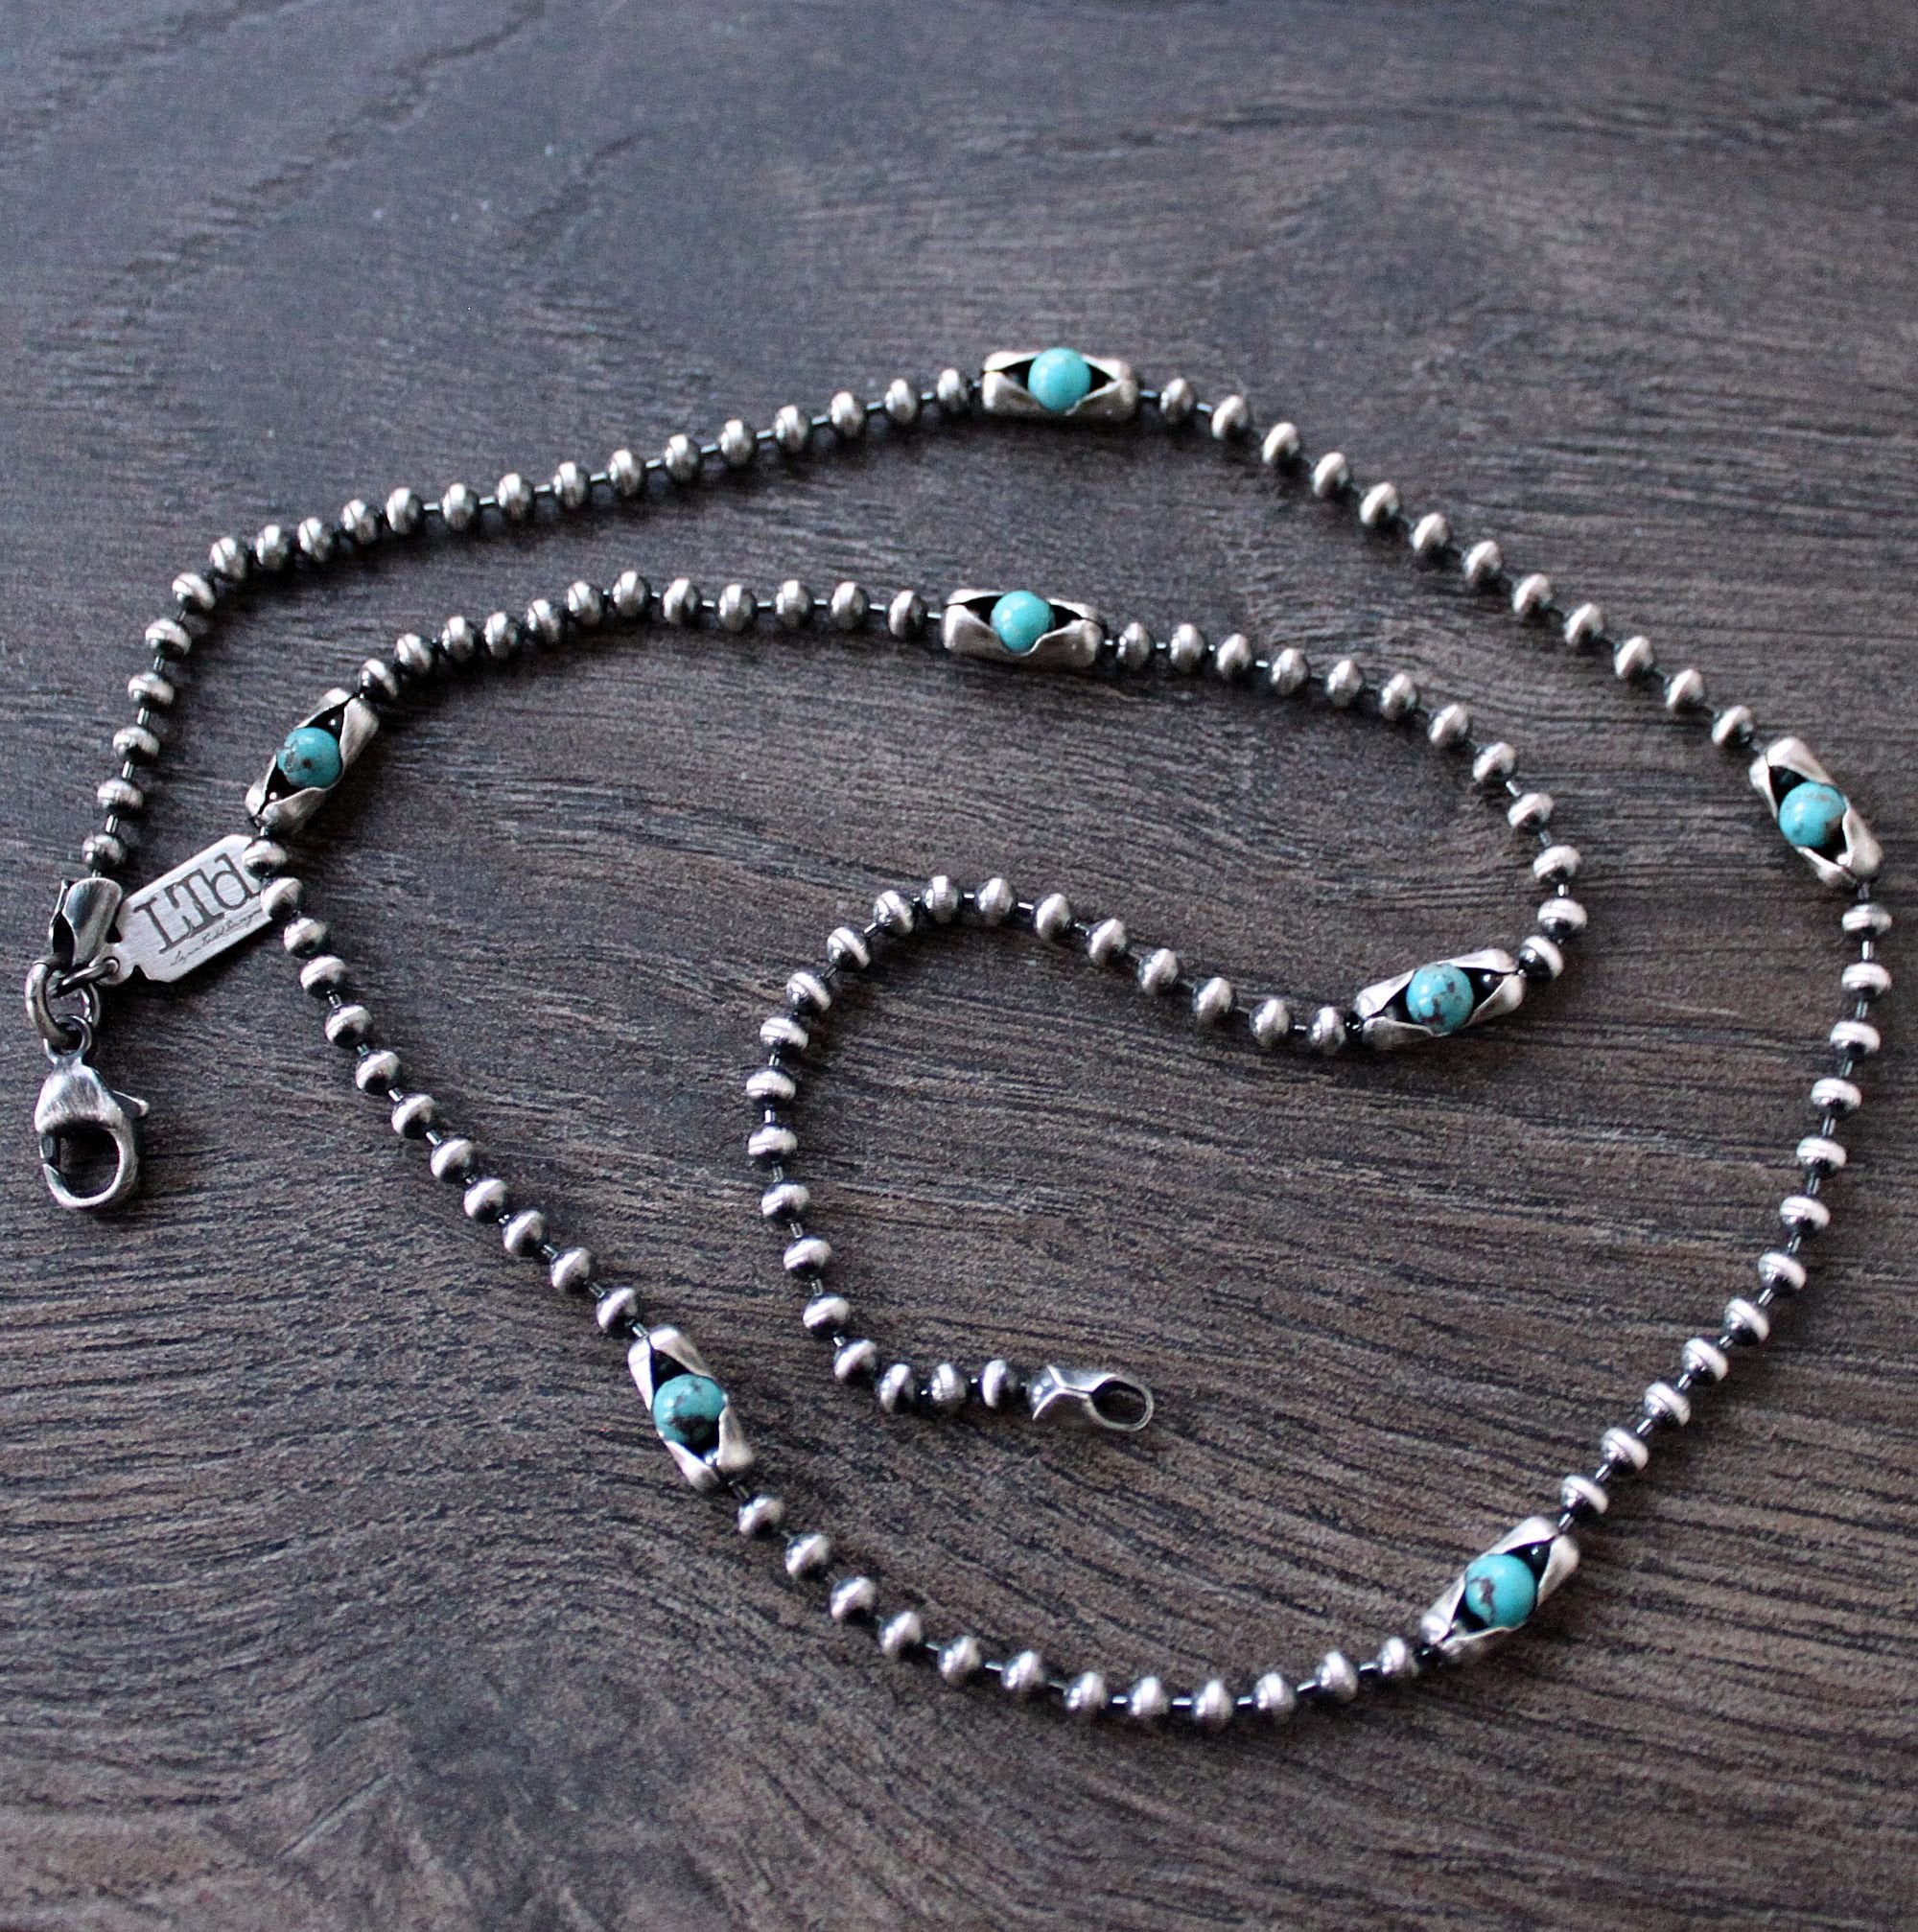 Heavy Sterling Silver Rosary Bead Necklace | Jewellerybox.co.uk